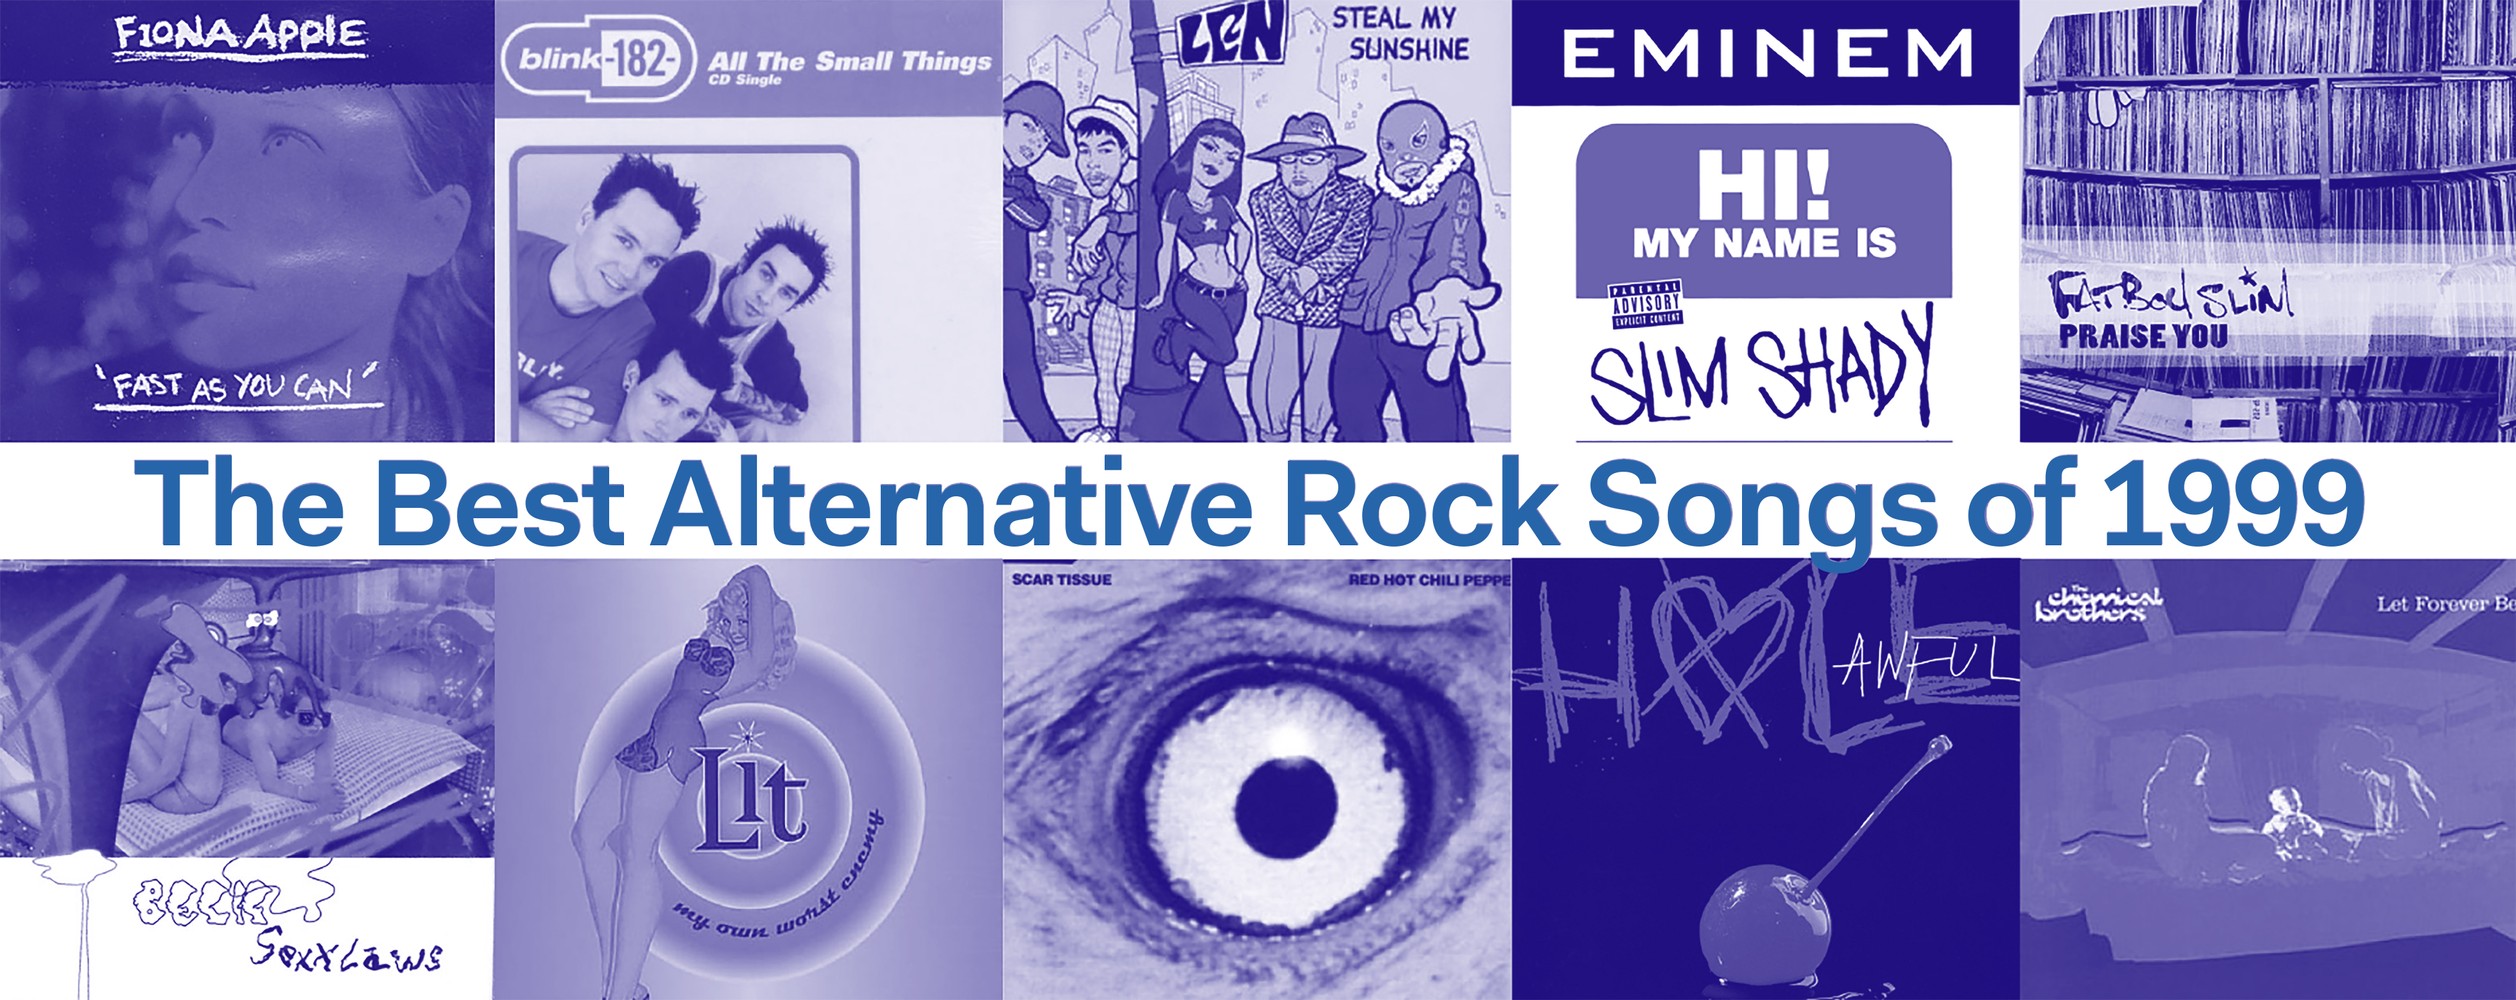 The Best Alternative Rock Songs of 1999 | SPIN - Page 2